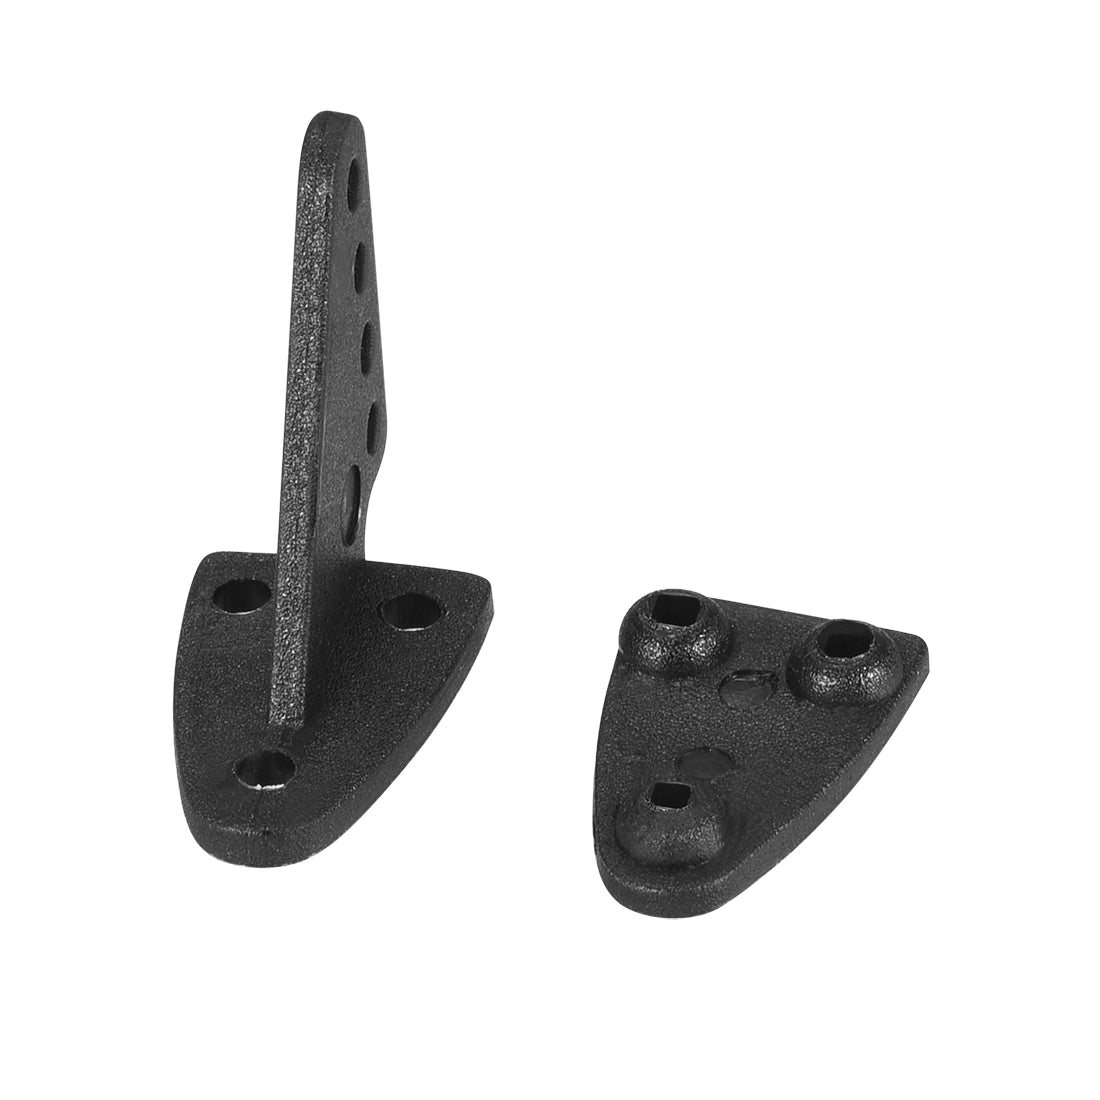 uxcell Uxcell Control Horn, 20x21mm Plastic Horns with 4 Holes 1.6mm for RC Airplane Parts Black 10 Sets